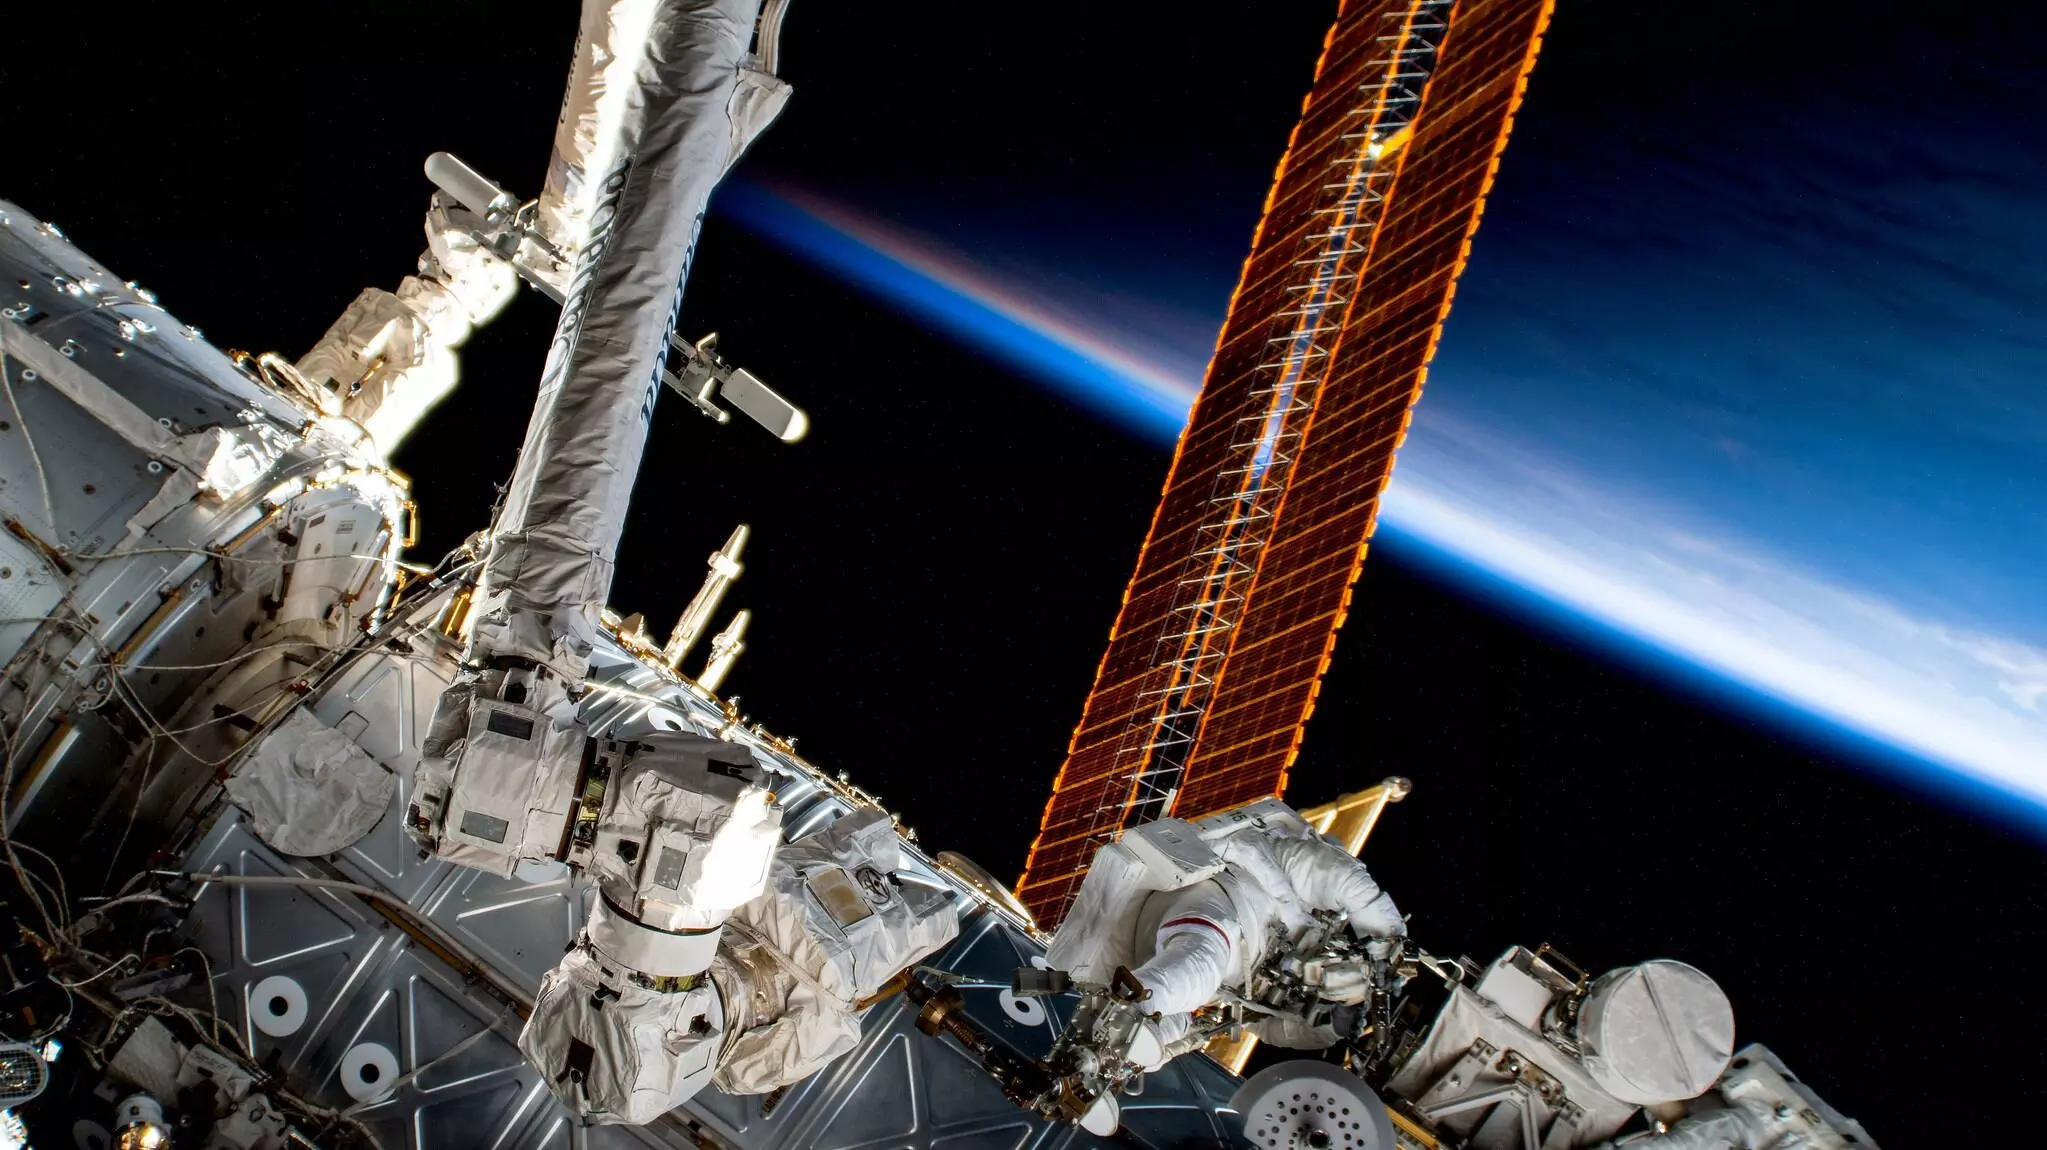 Power Outage at Mission Control Temporarily Disrupts NASA’s Link to ISS